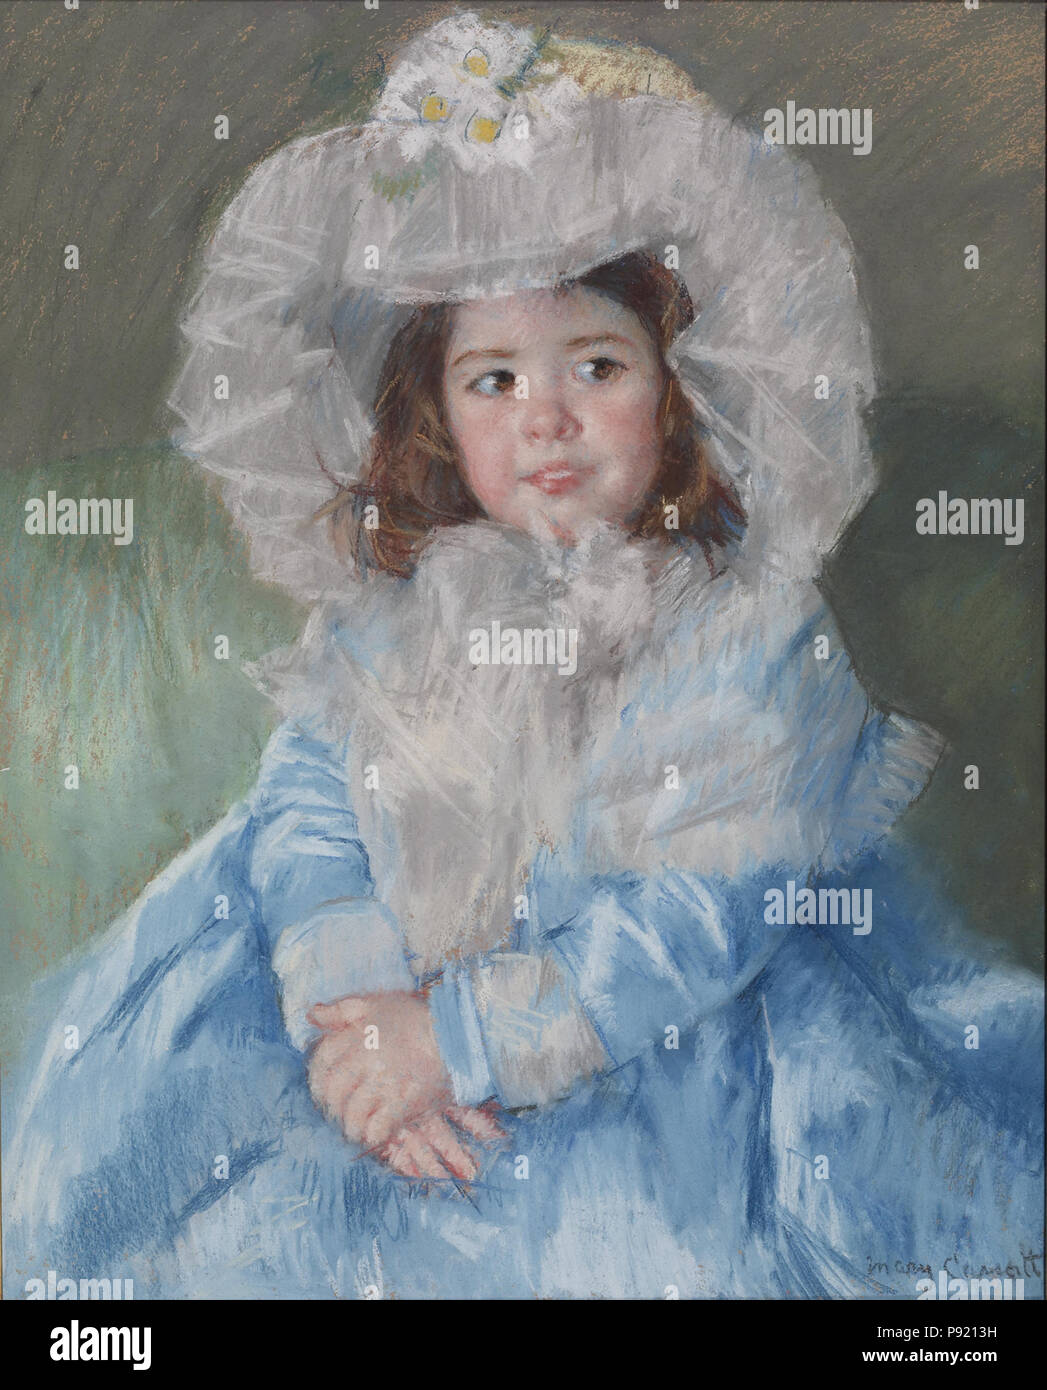 Mary Cassatt (American, 1844-1926). 'Margot (Lefebvre) in Blue,' 1902. pastel on brown, moderately thick, slightly textured, wove paper. Walters Art Museum (37.303): Acquired by Henry Walters, 1925. 412 Mary Cassatt - Margot (Lefebvre) in Blue - Walters 37303 Stock Photo